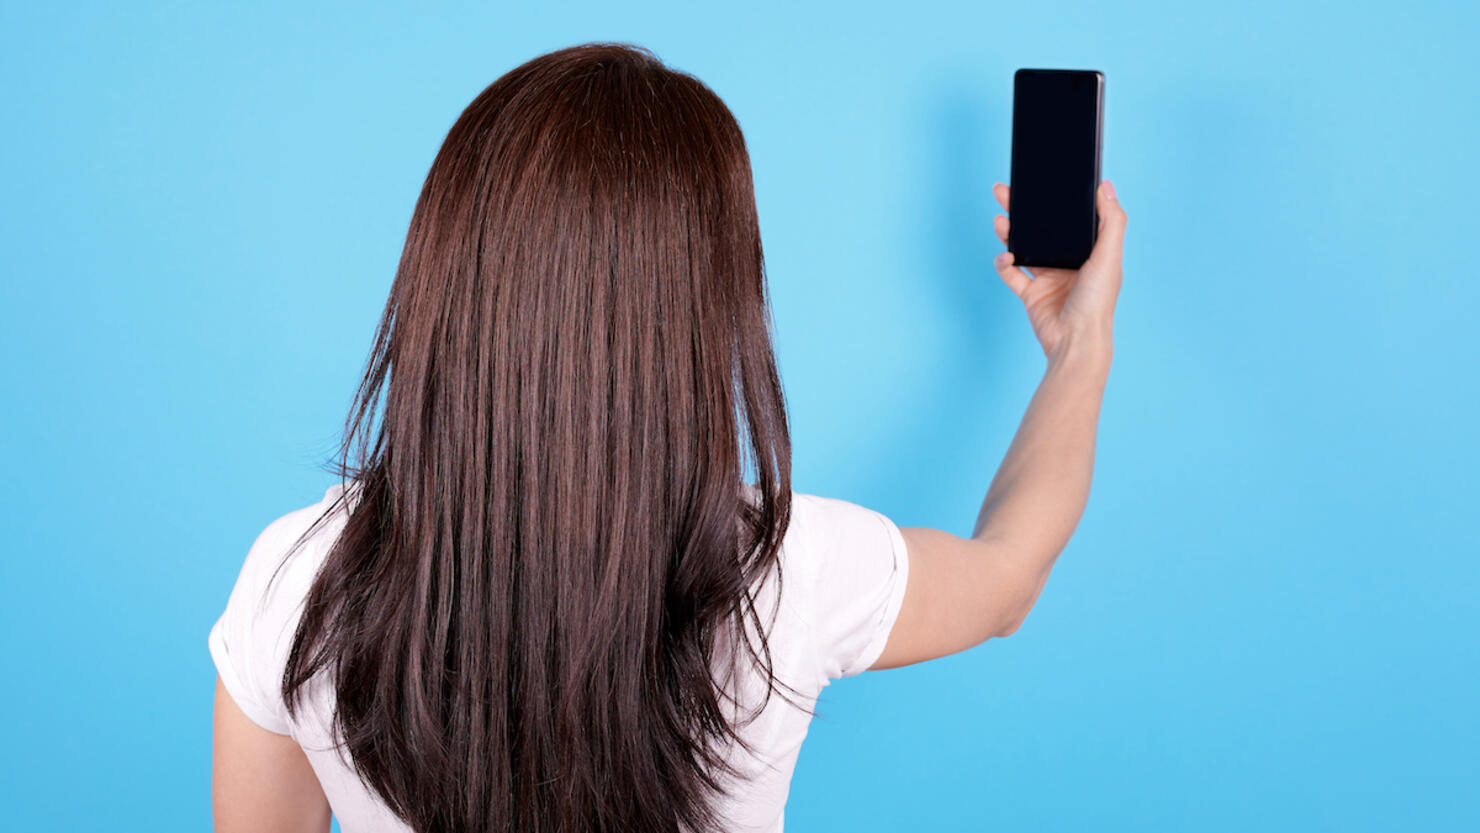 Brunette girl with long hair using mobile phone, make selfie, view from behind. Isolated on blue background.